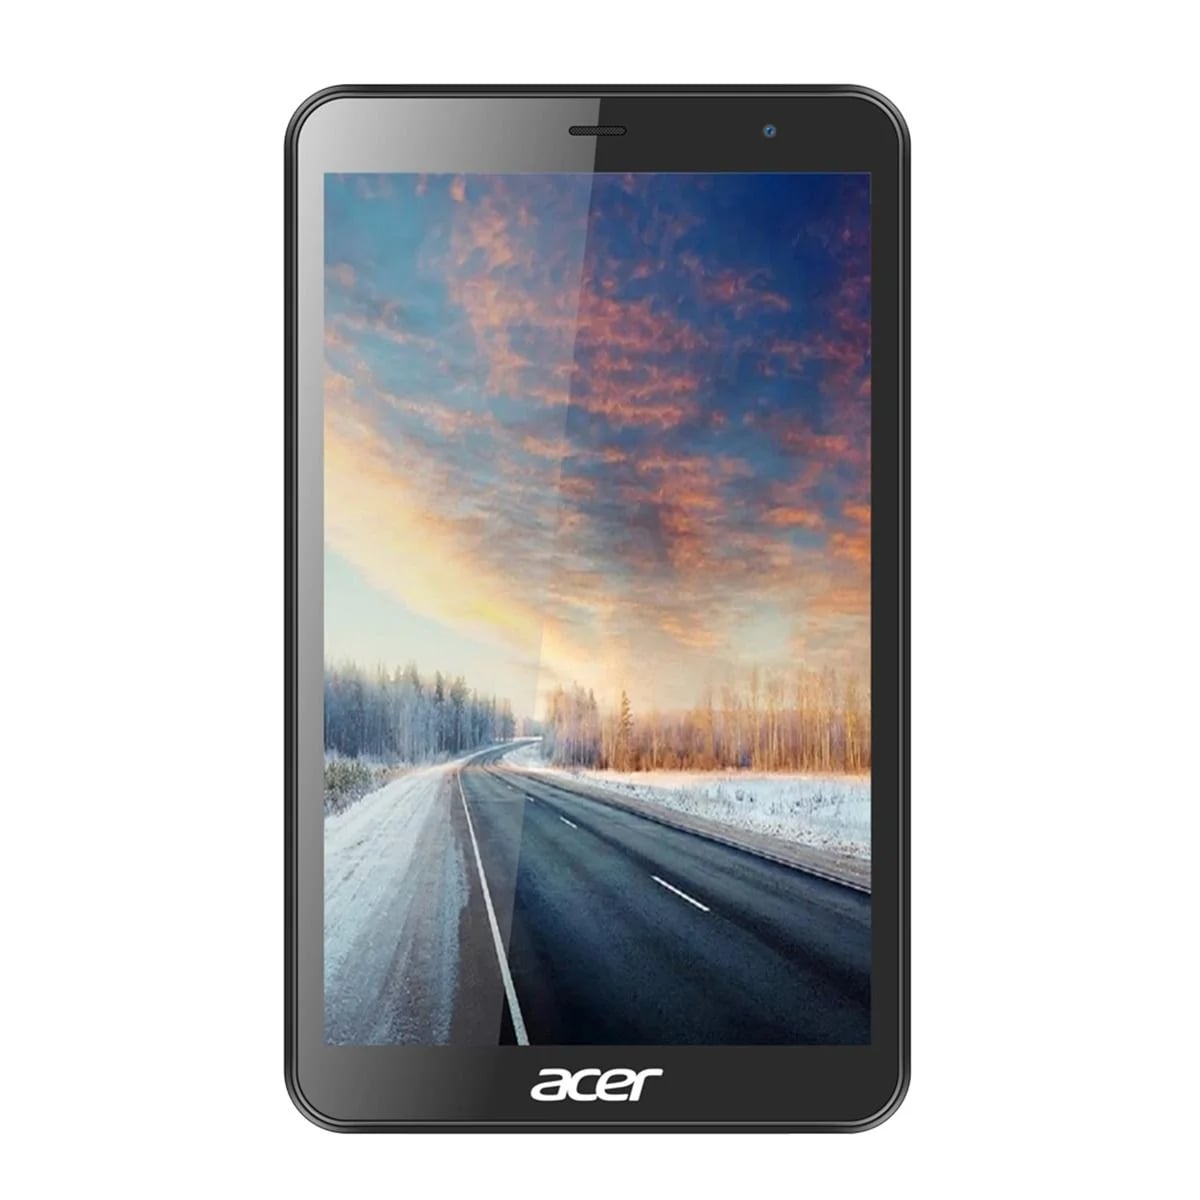 Acer (UT.027SI.058) one T4-82L, 8 Inch Tablet with 2GB RAM, 32 GB EMMC, Dual-Camera, 4G LTE ,Android 10 - Black